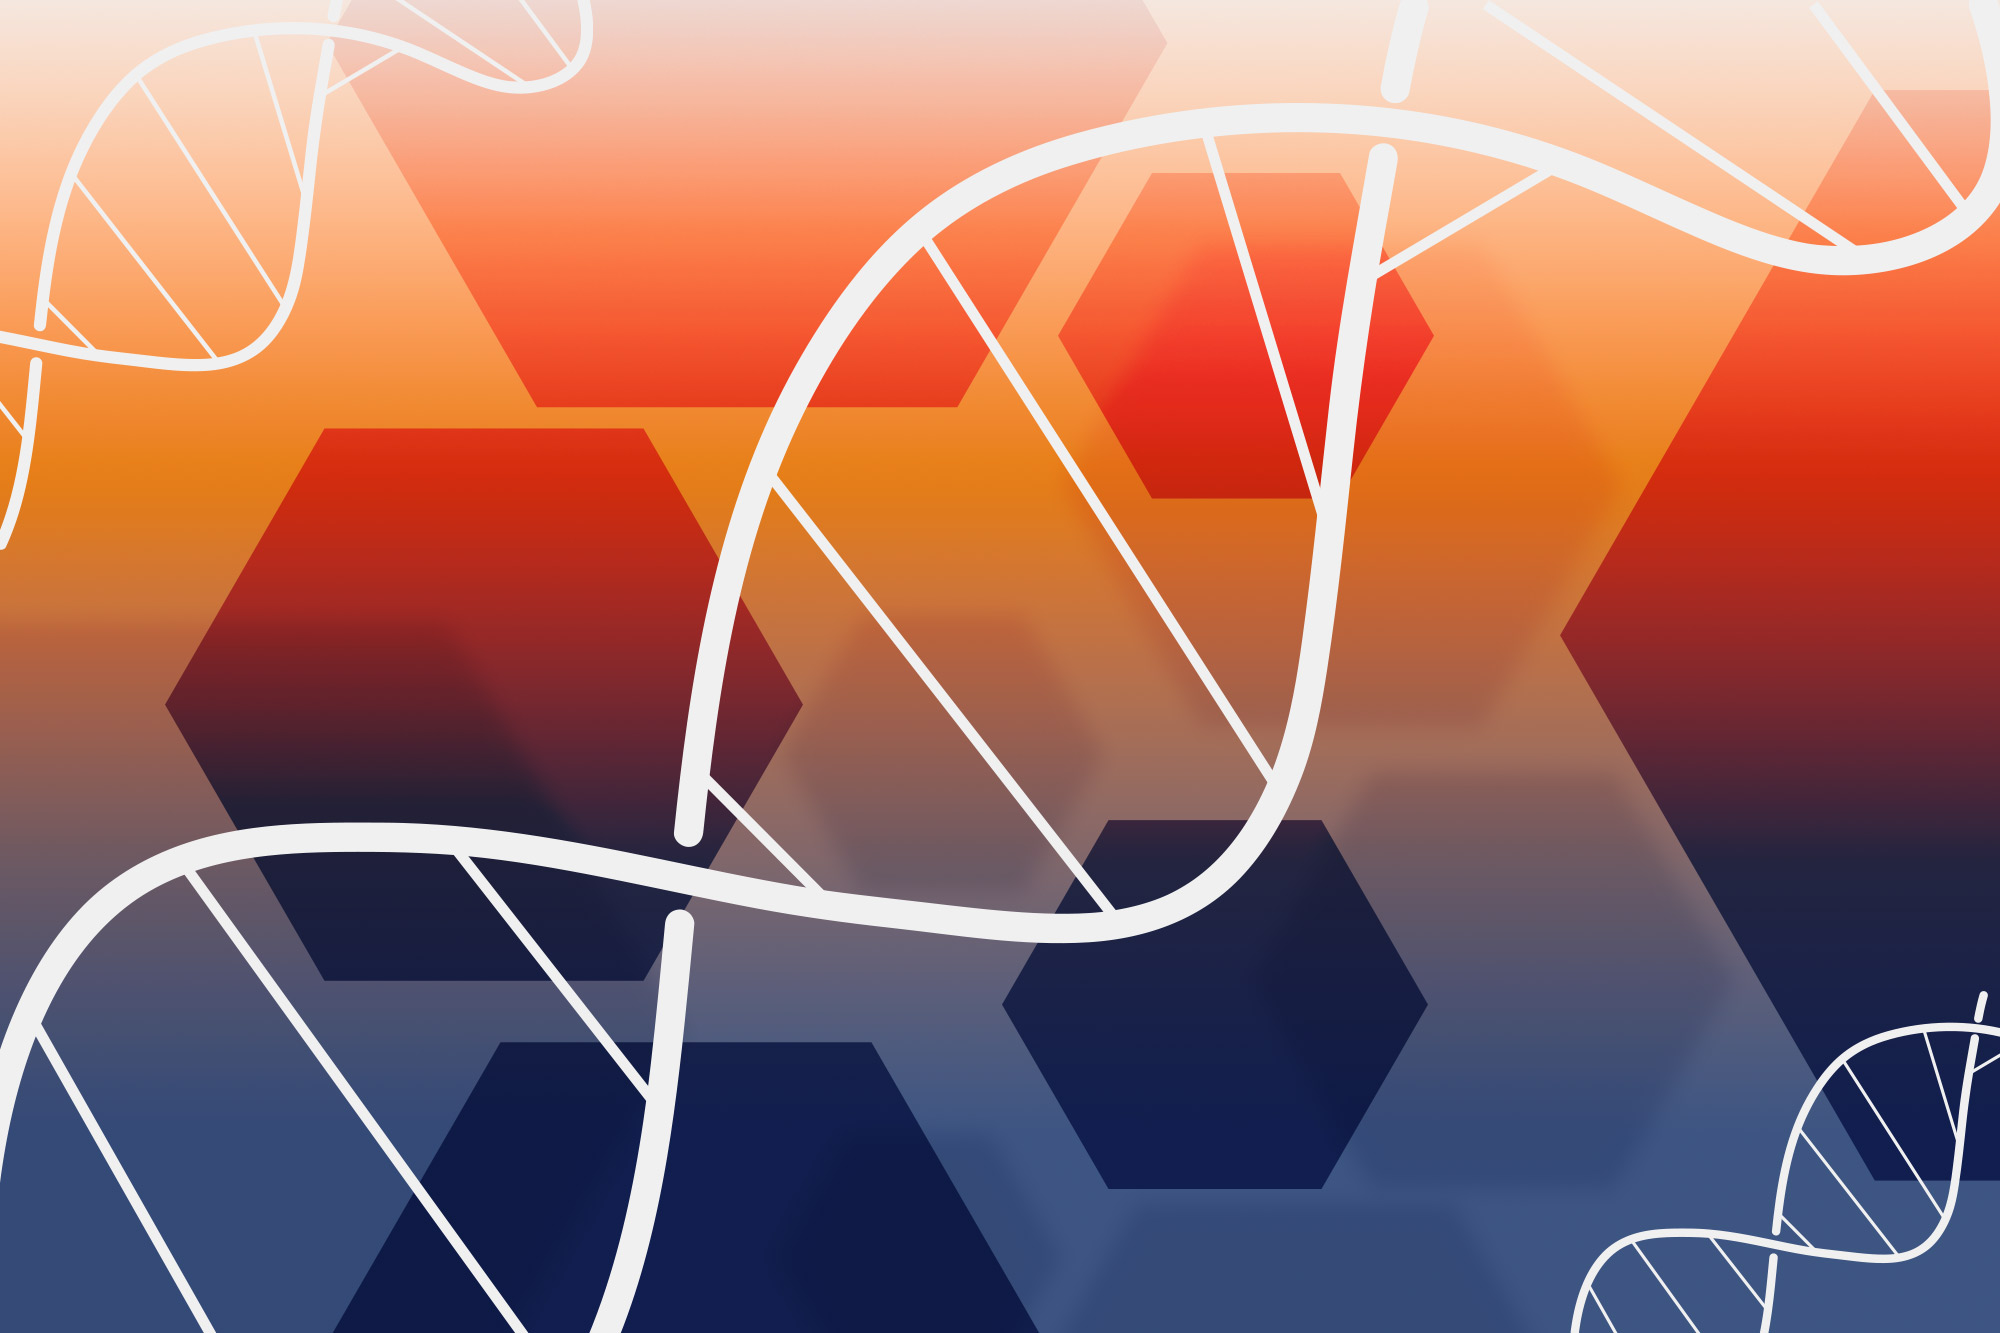 A double helix floats over an abstract field of orange and blue hexagons